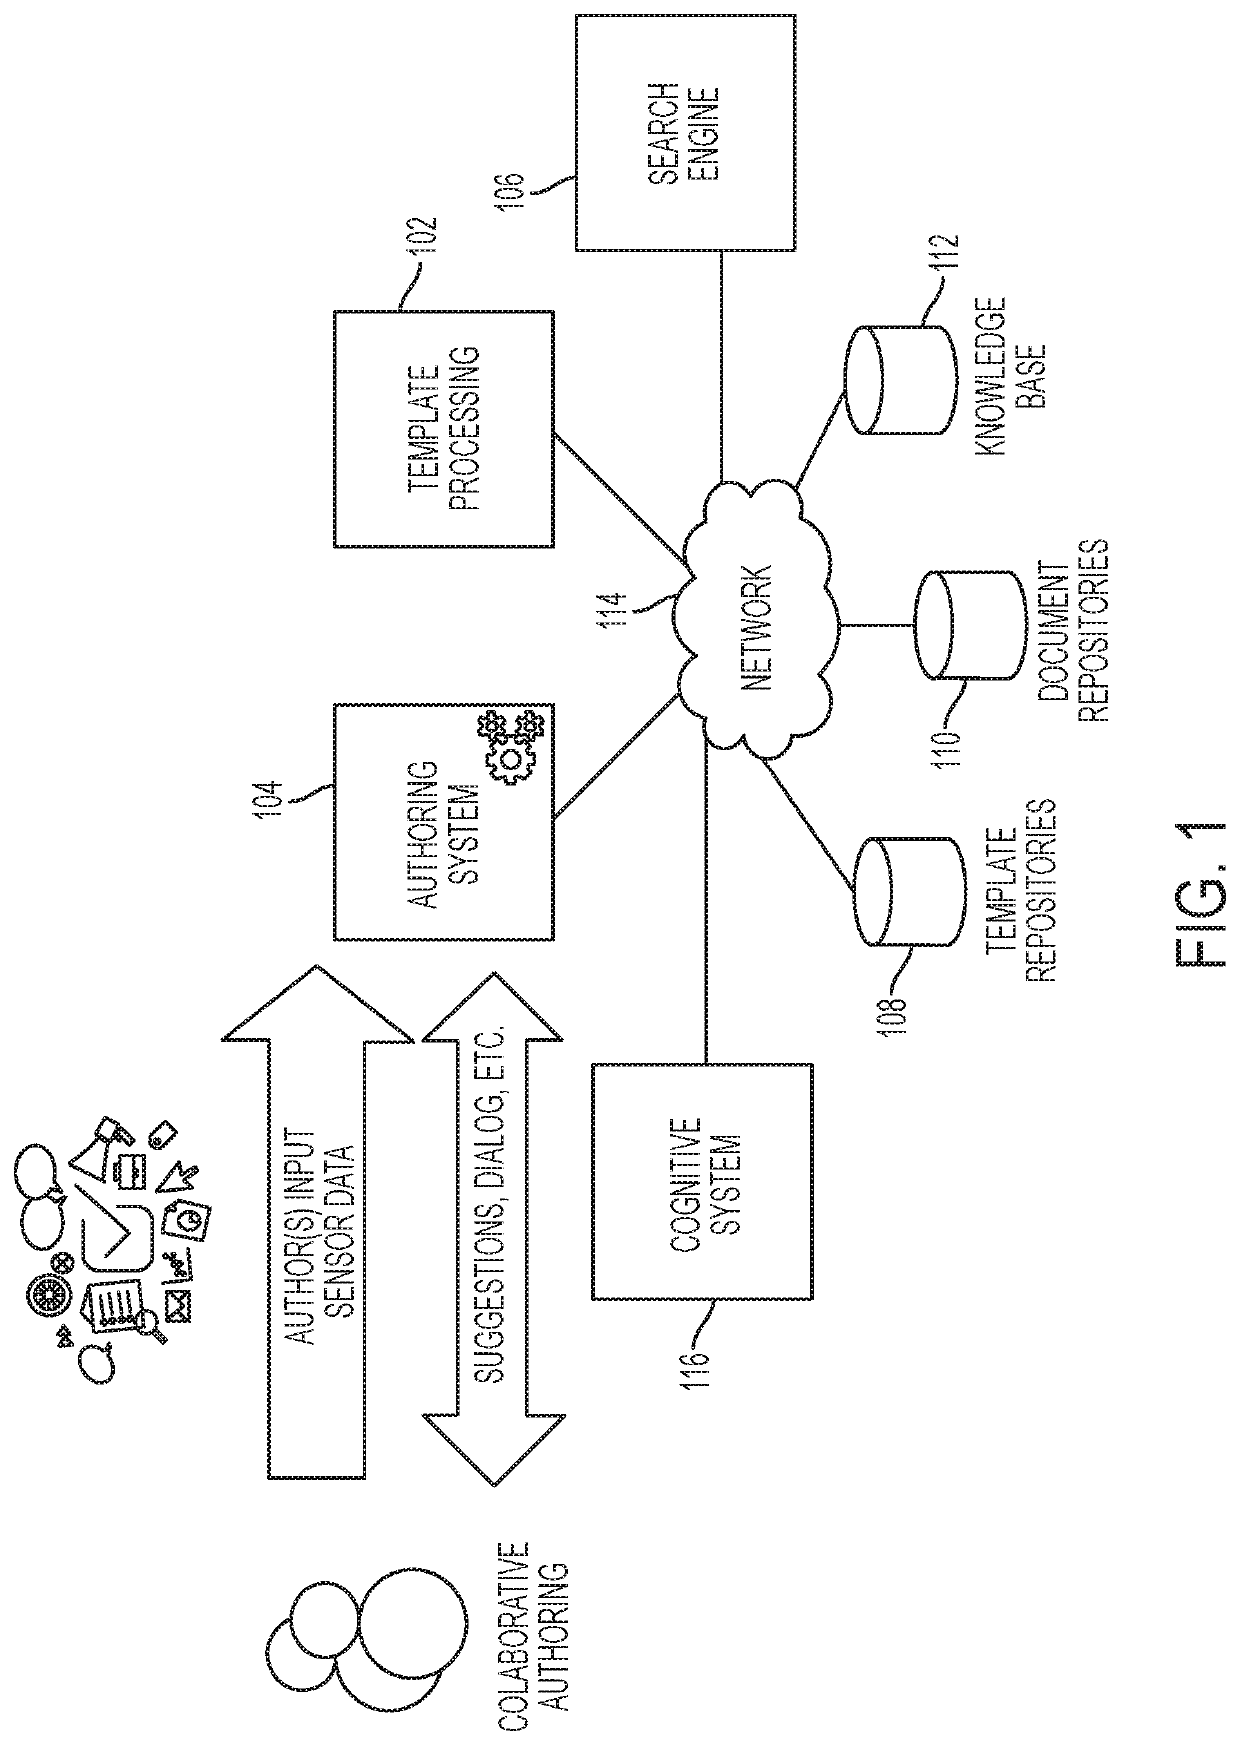 Automated document authoring assistant through cognitive computing